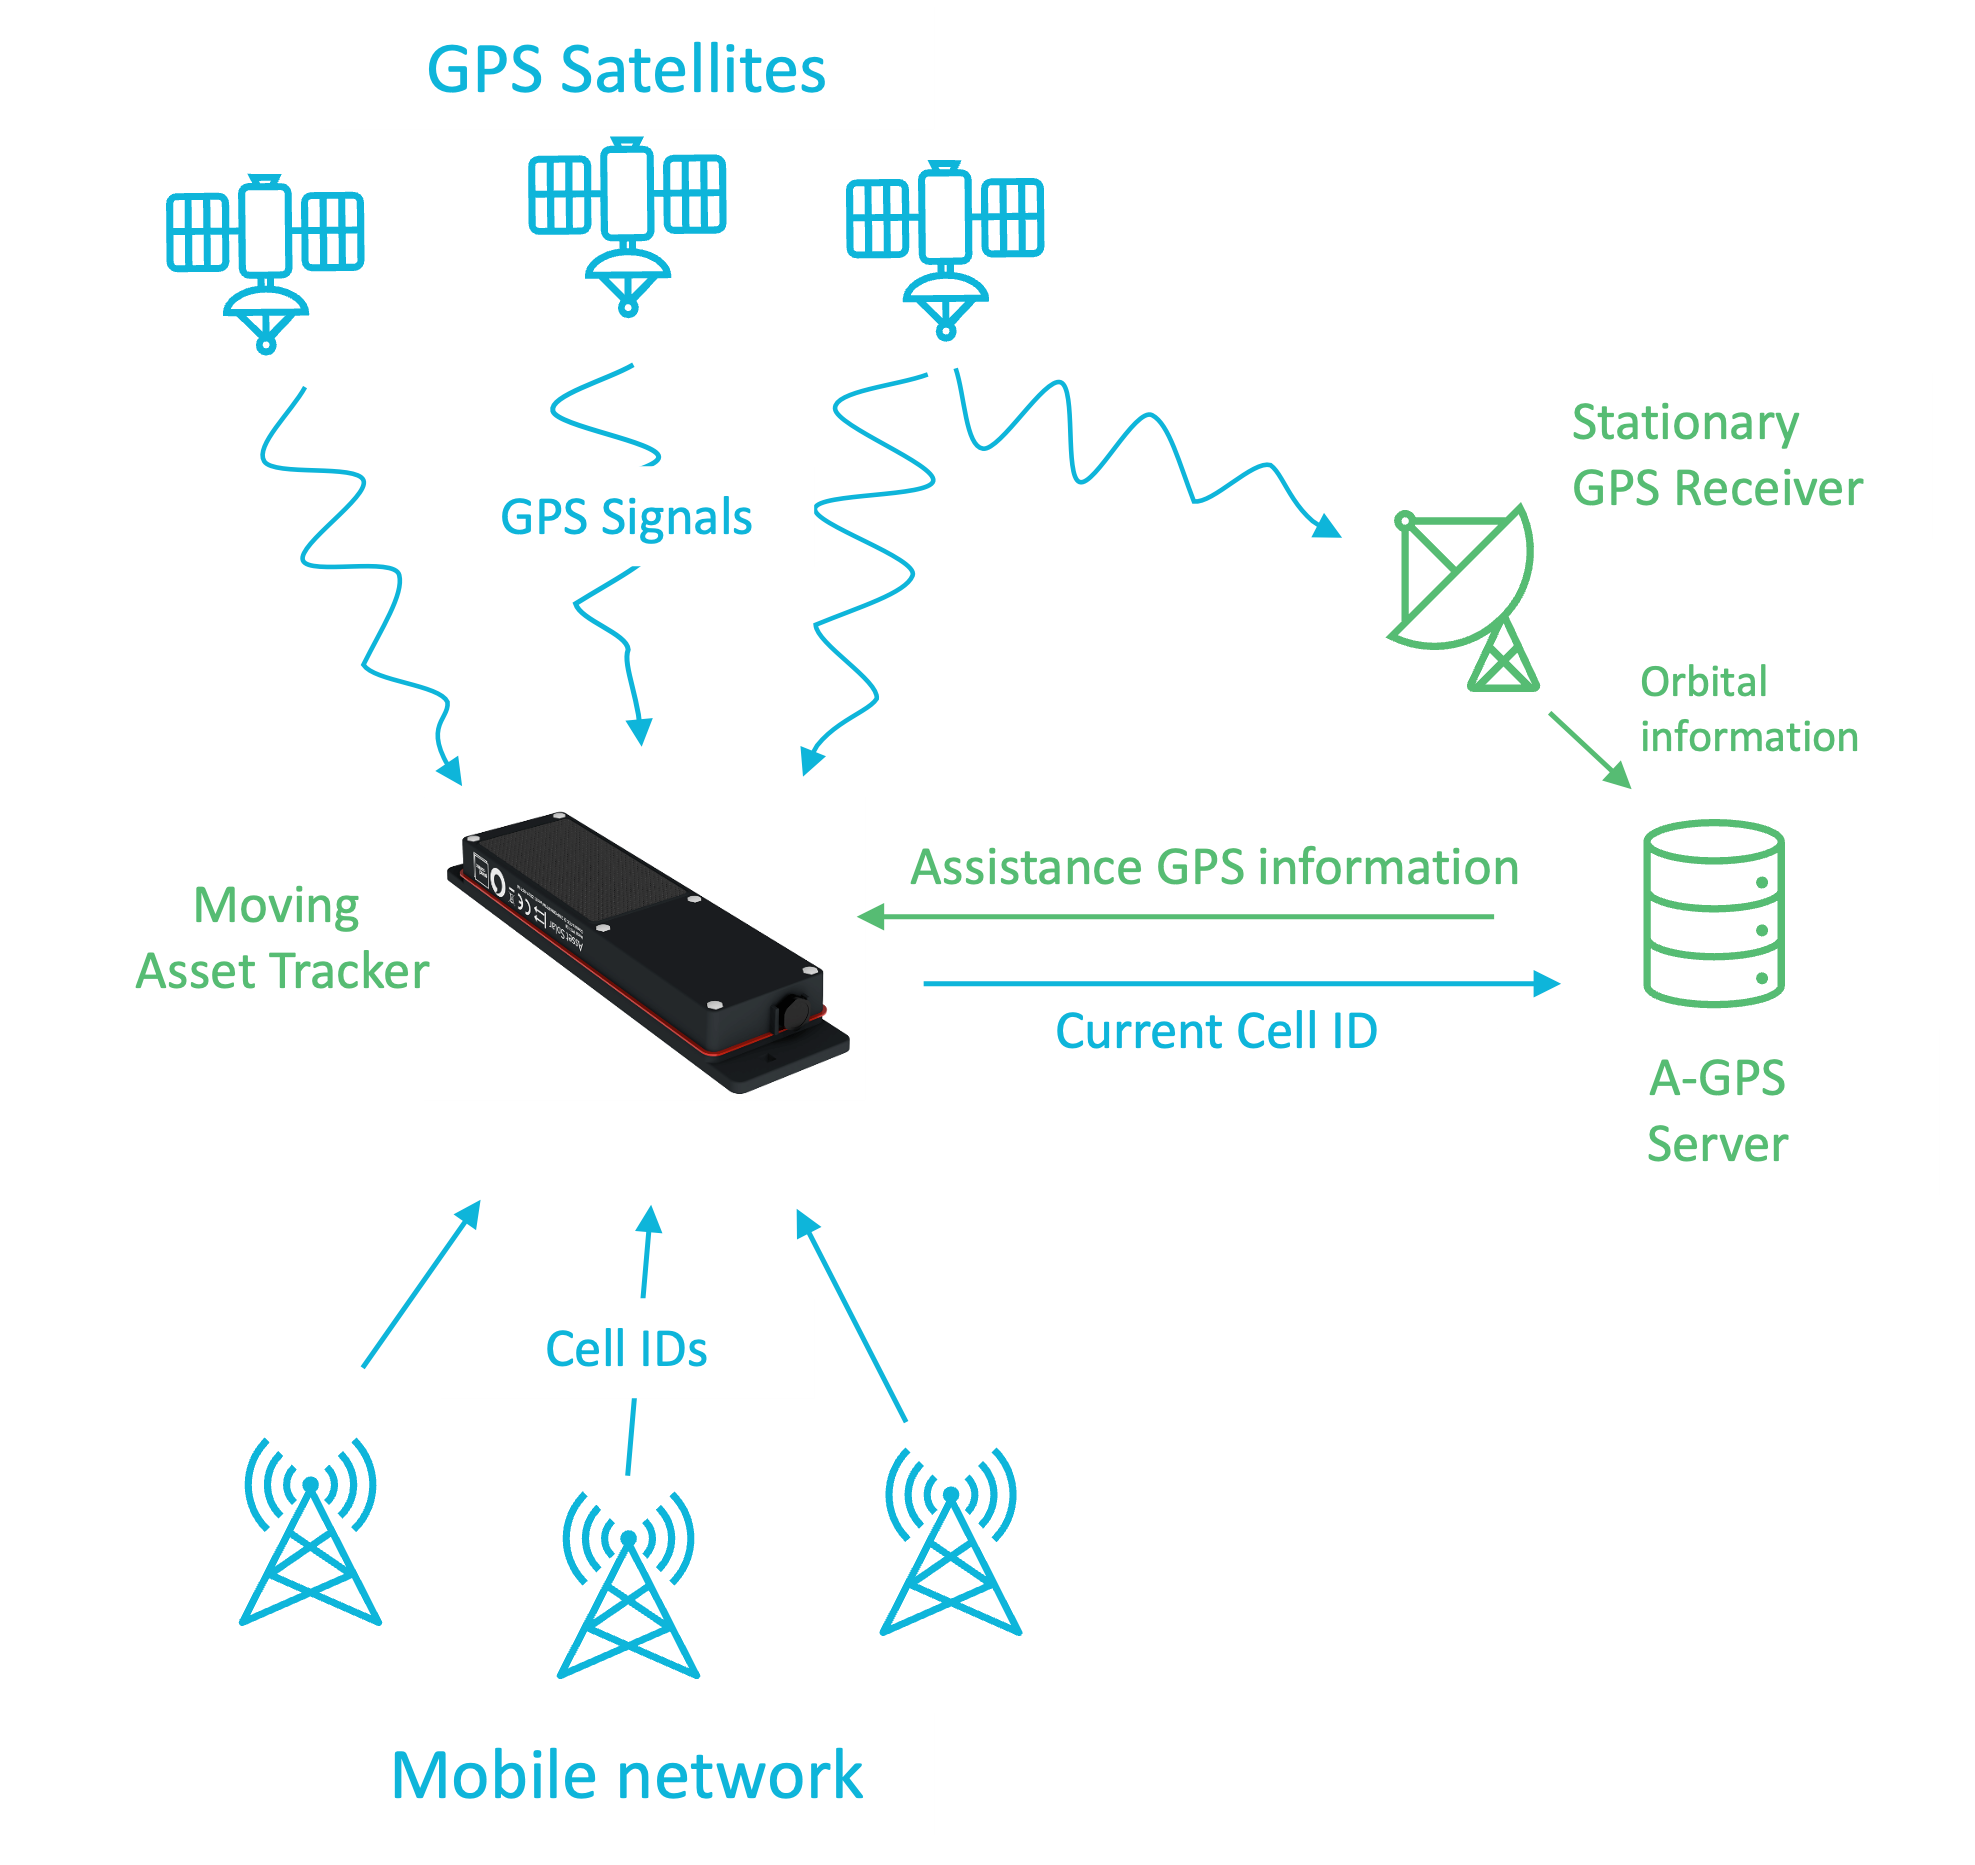 Functionality A-GPS